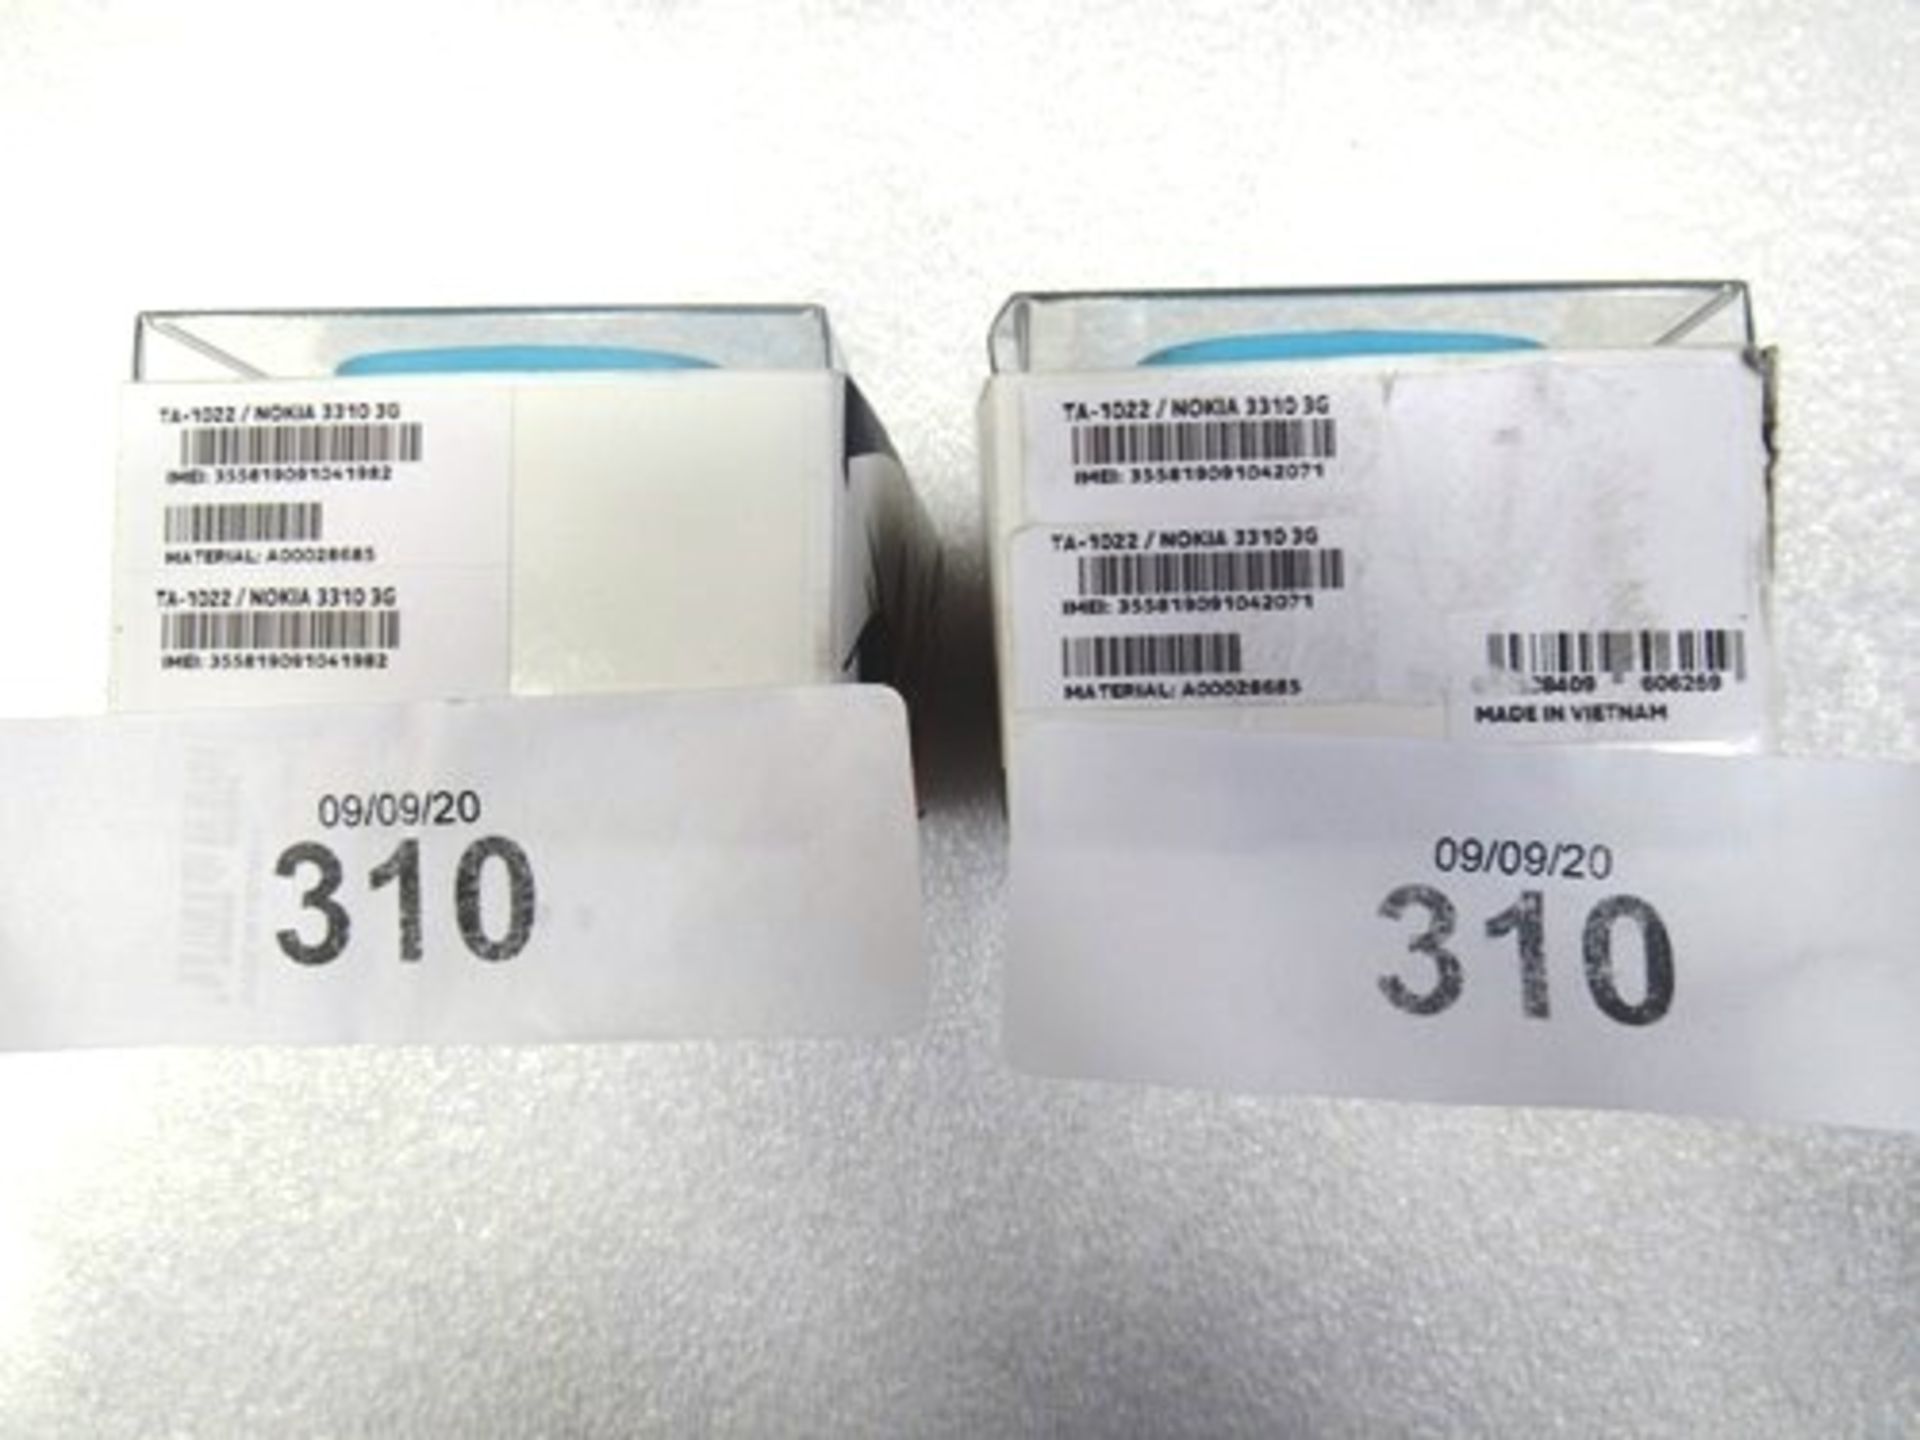 2 x Nokia 33103G phones , REF: TA-1022, IMEI: 355819091042071 and 35581909101982 - 1 x Sealed new - Image 2 of 2